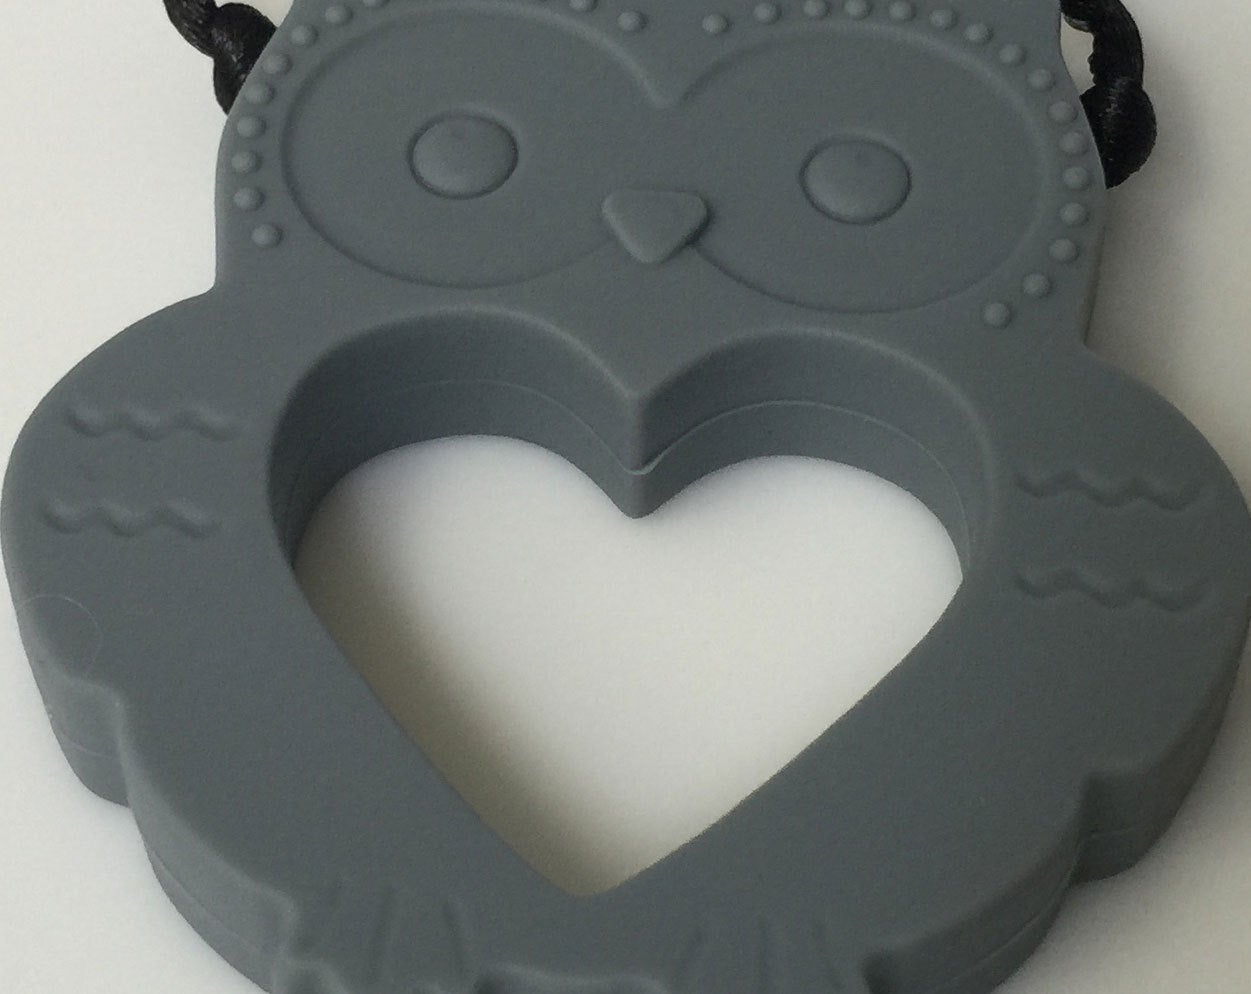 1 Silicone Owl Teether / Pendant in Grey - Silicone Teething, Silicone Teether, Teething Pendant